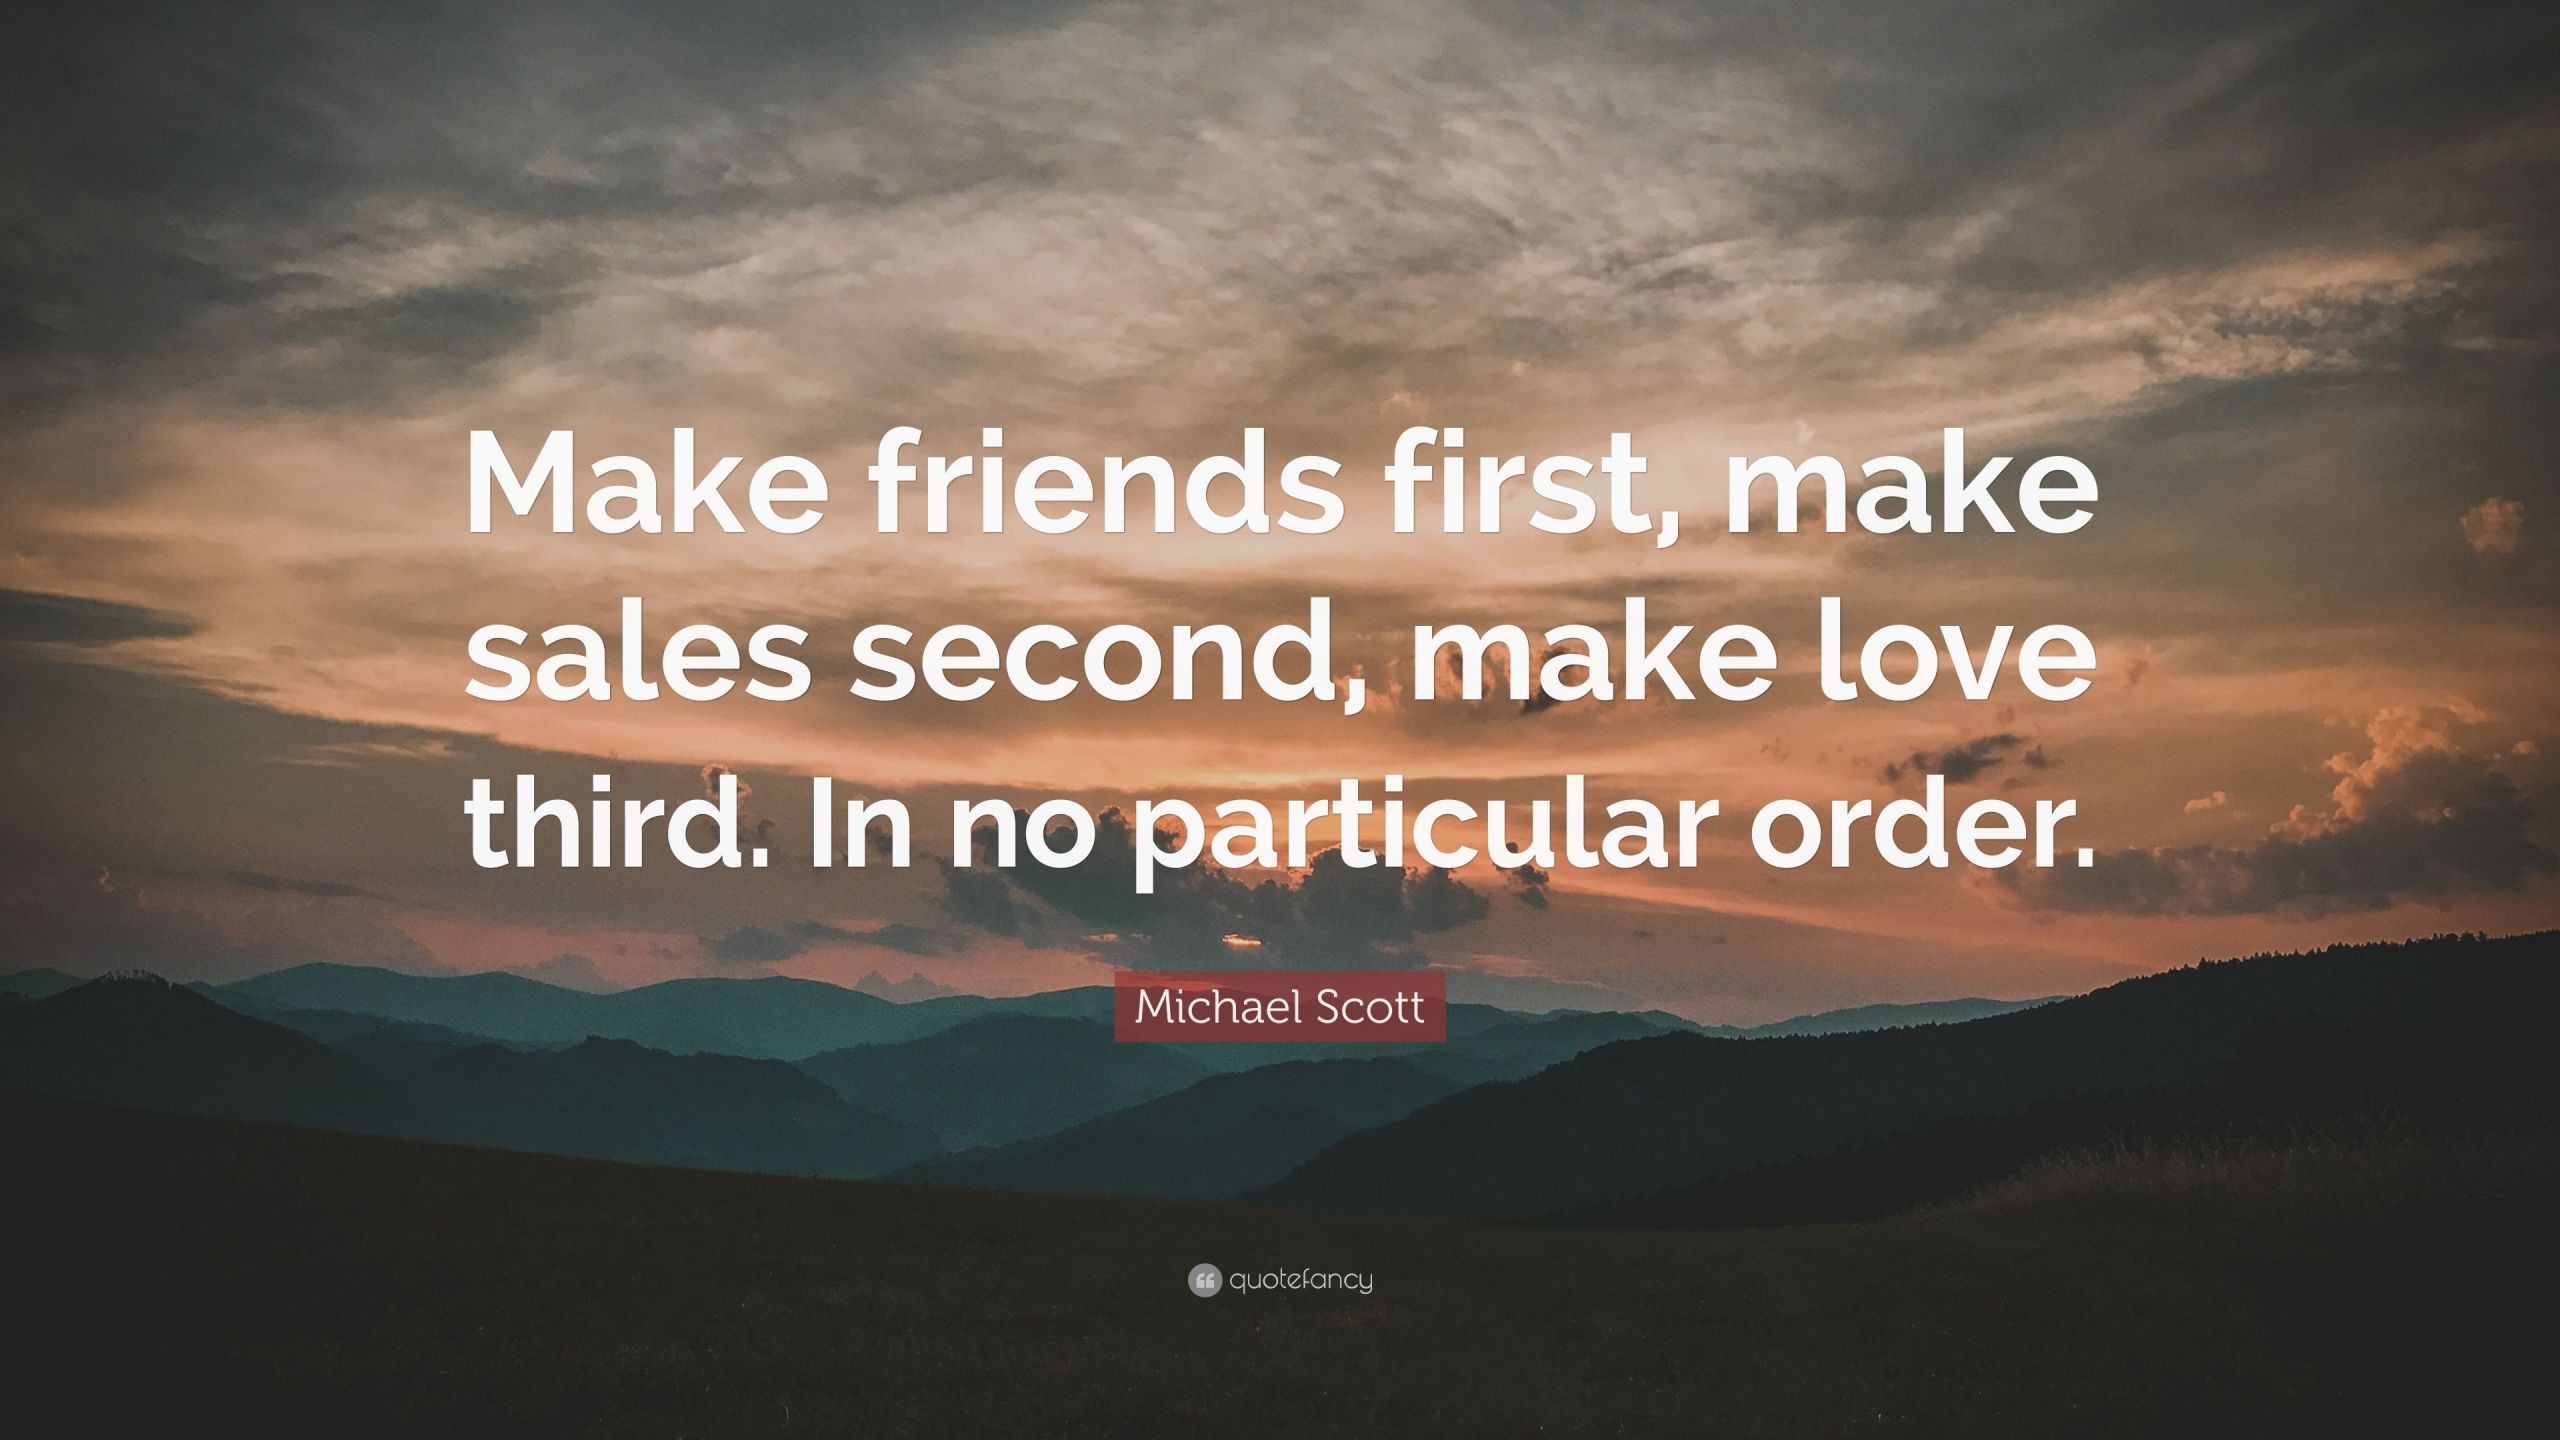 Michael Scott Quotes About Love
 Michael Scott Quote “Make friends first make sales